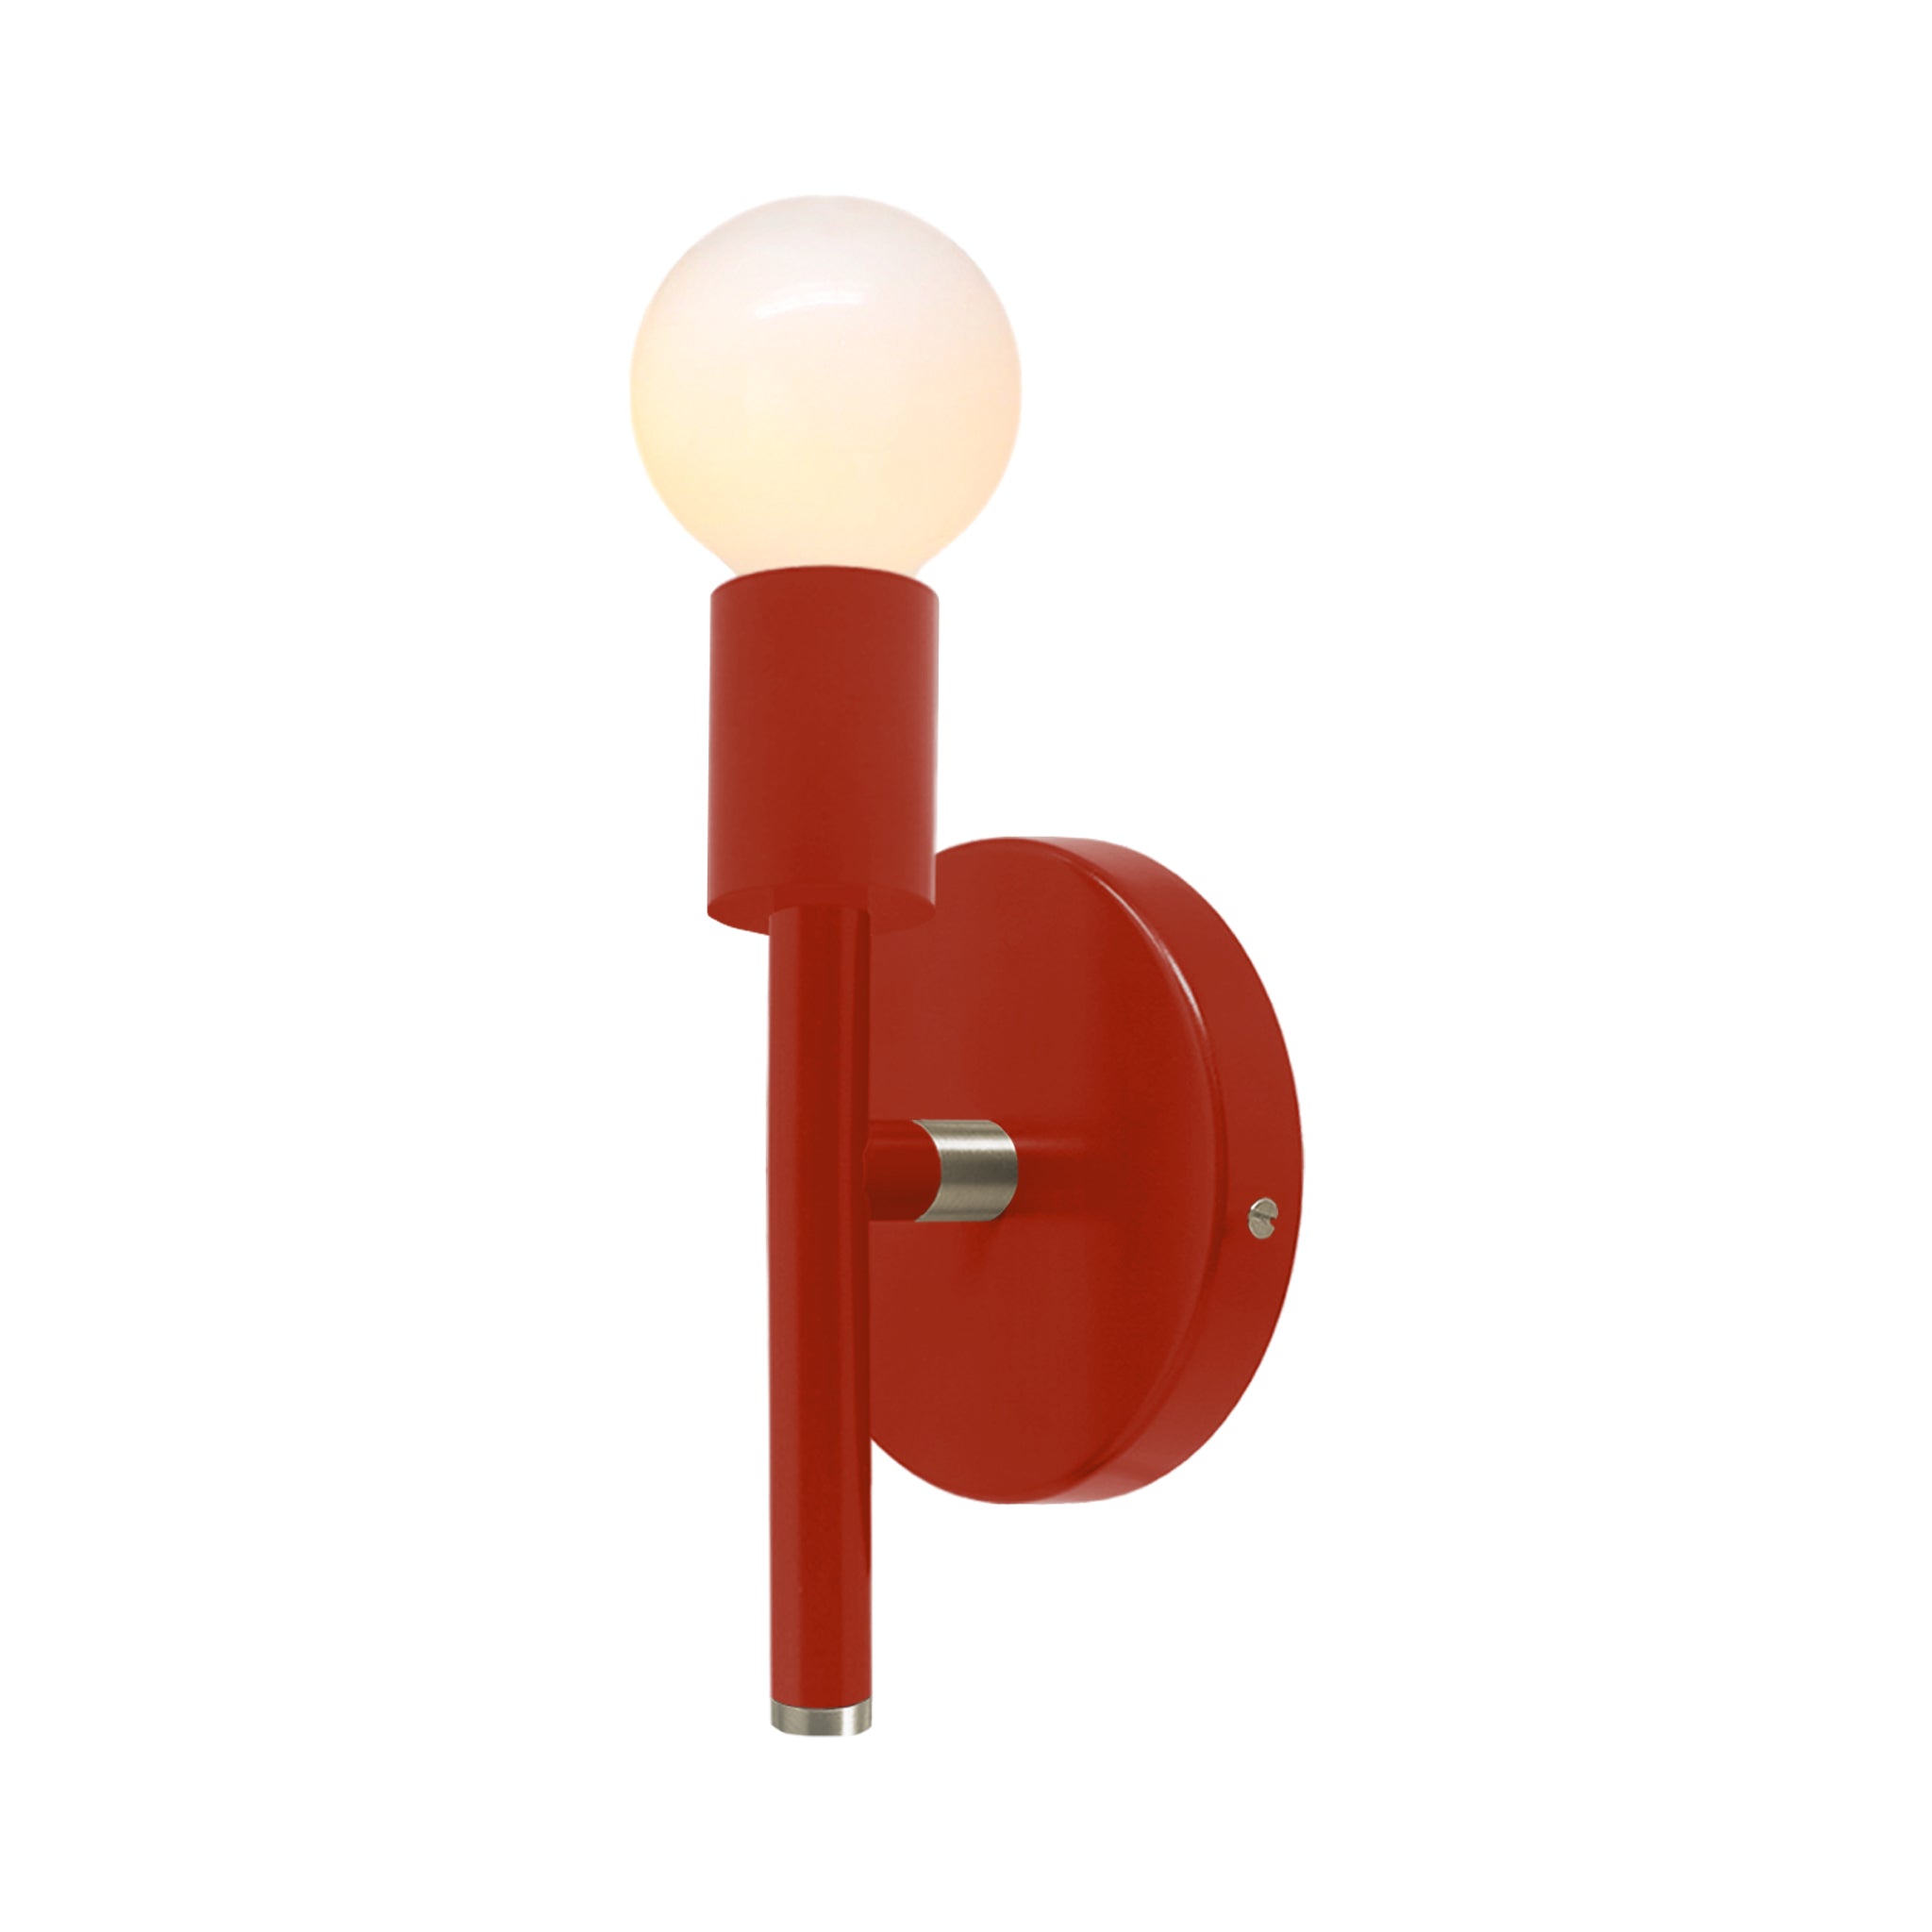 Nickel and riding hood red color Major sconce 9" Dutton Brown lighting